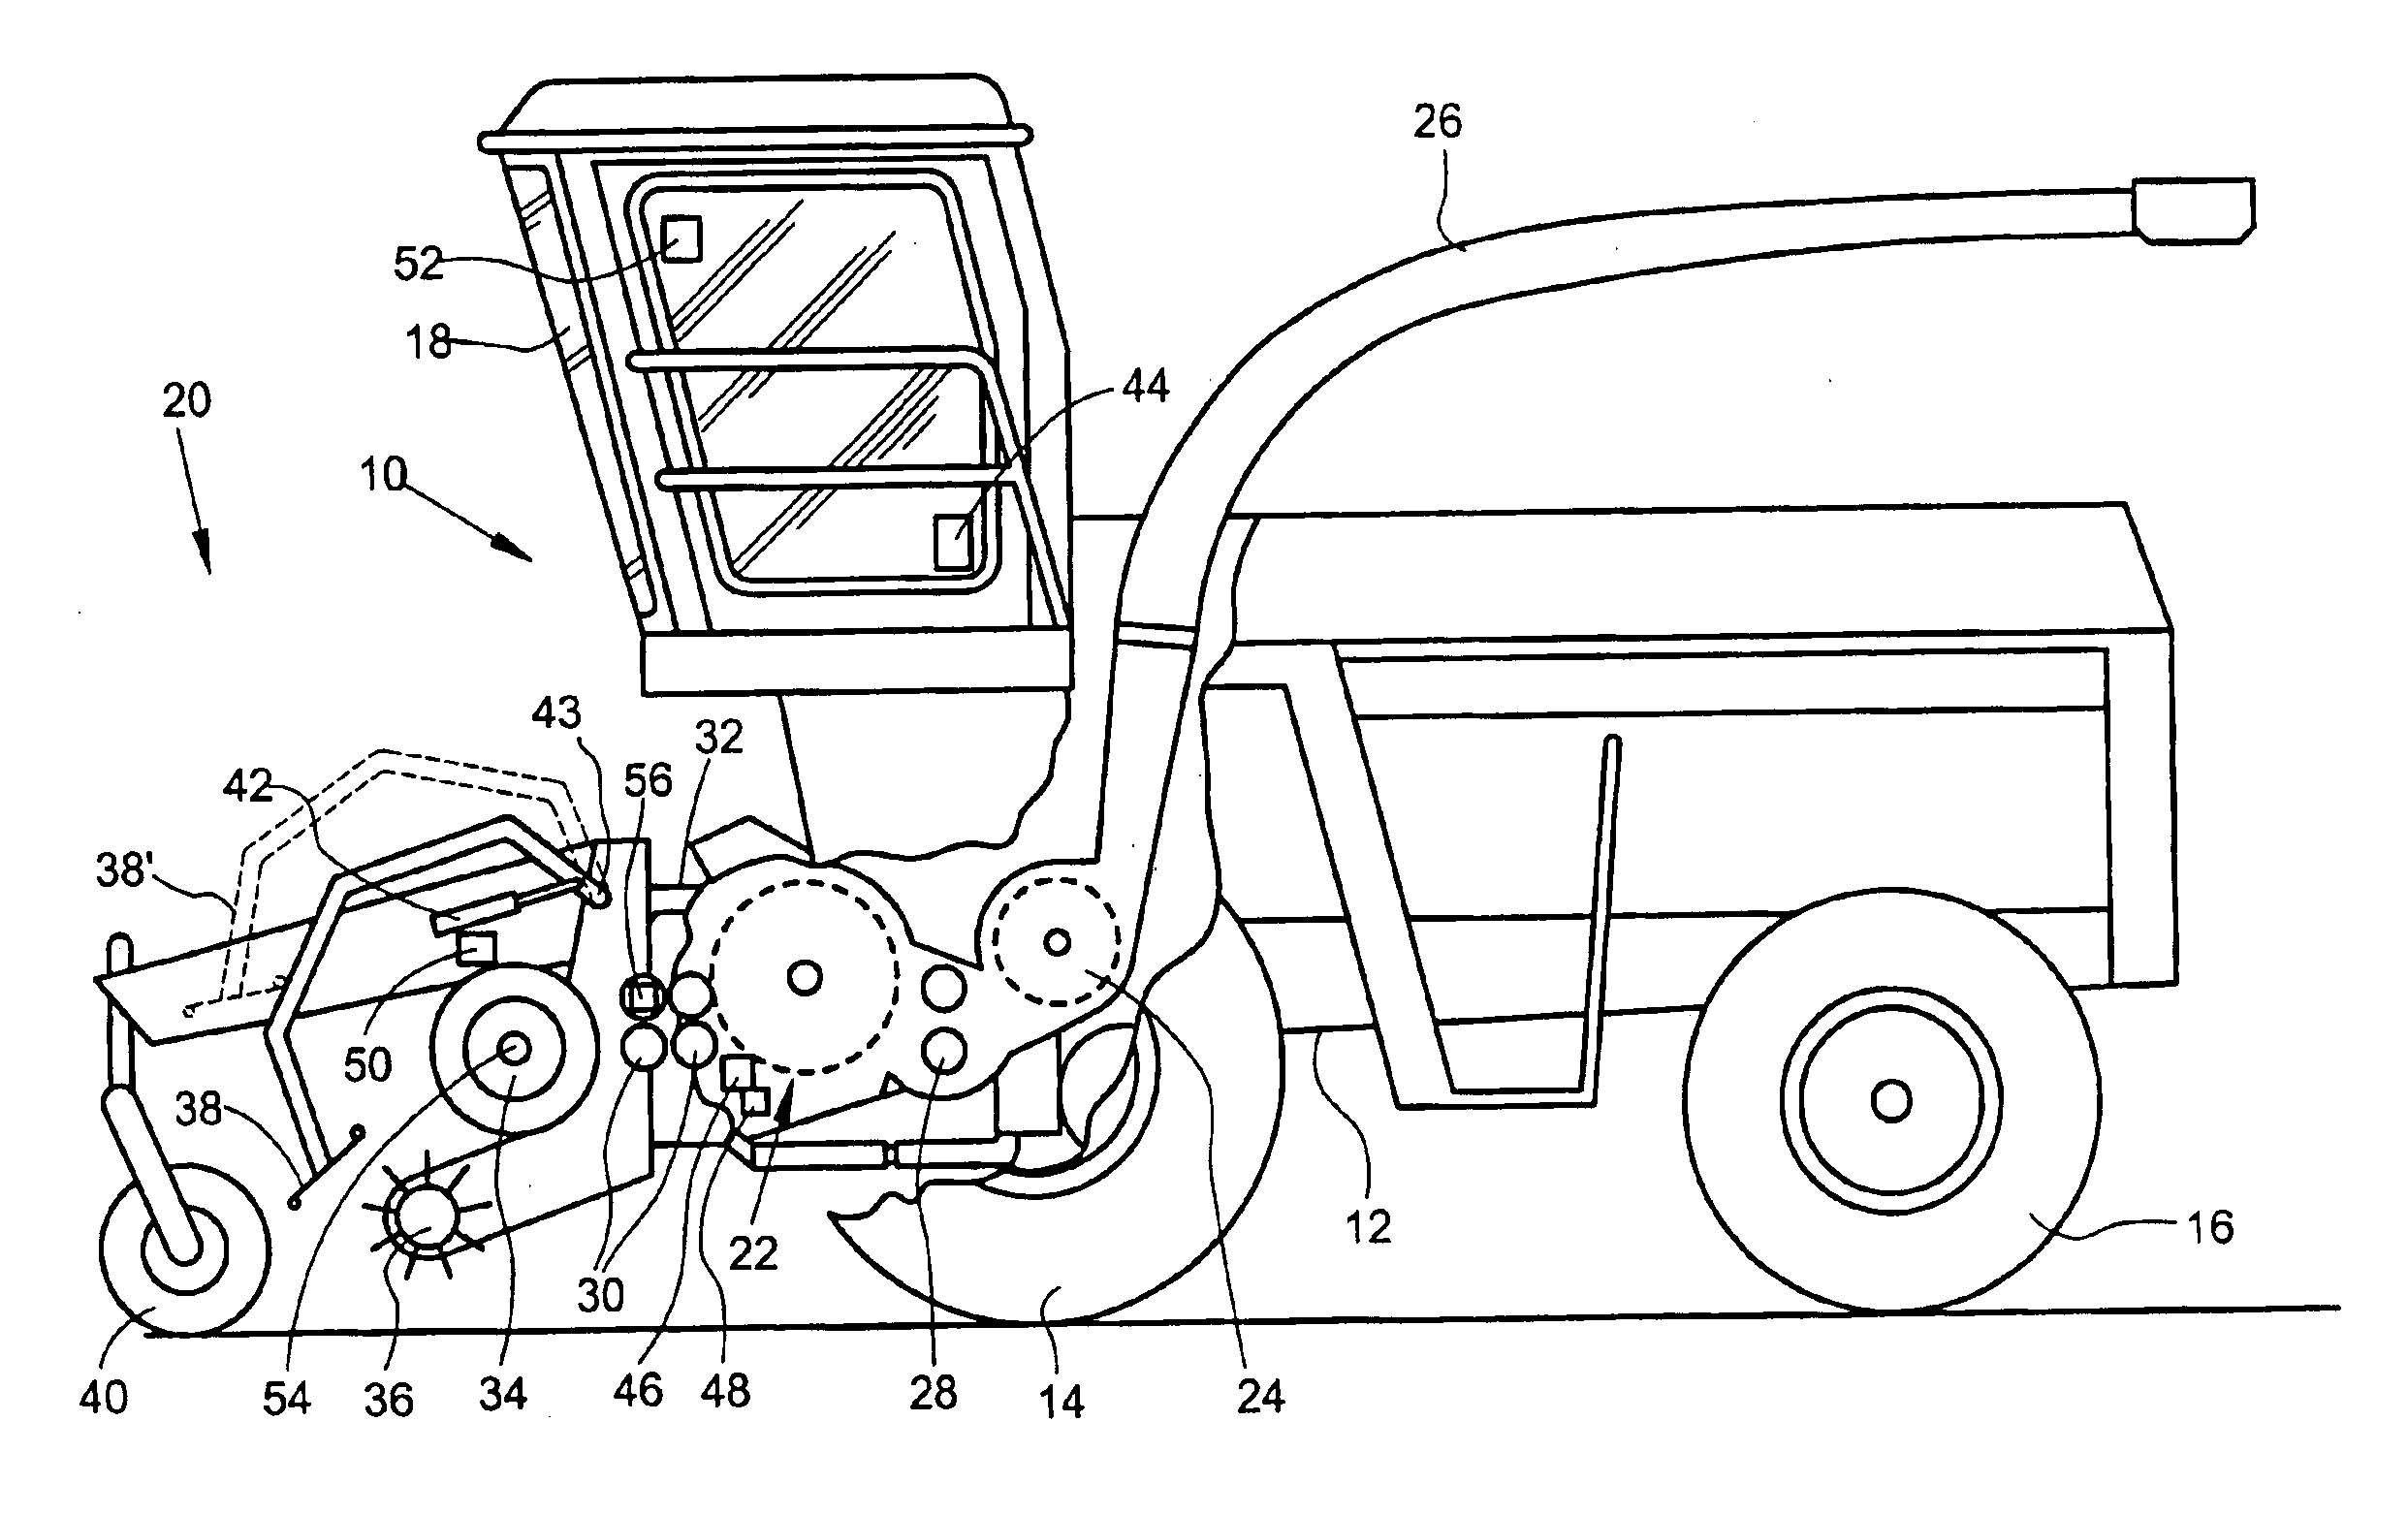 Detection arrangement for the detection of a crop jam in a harvesting machine